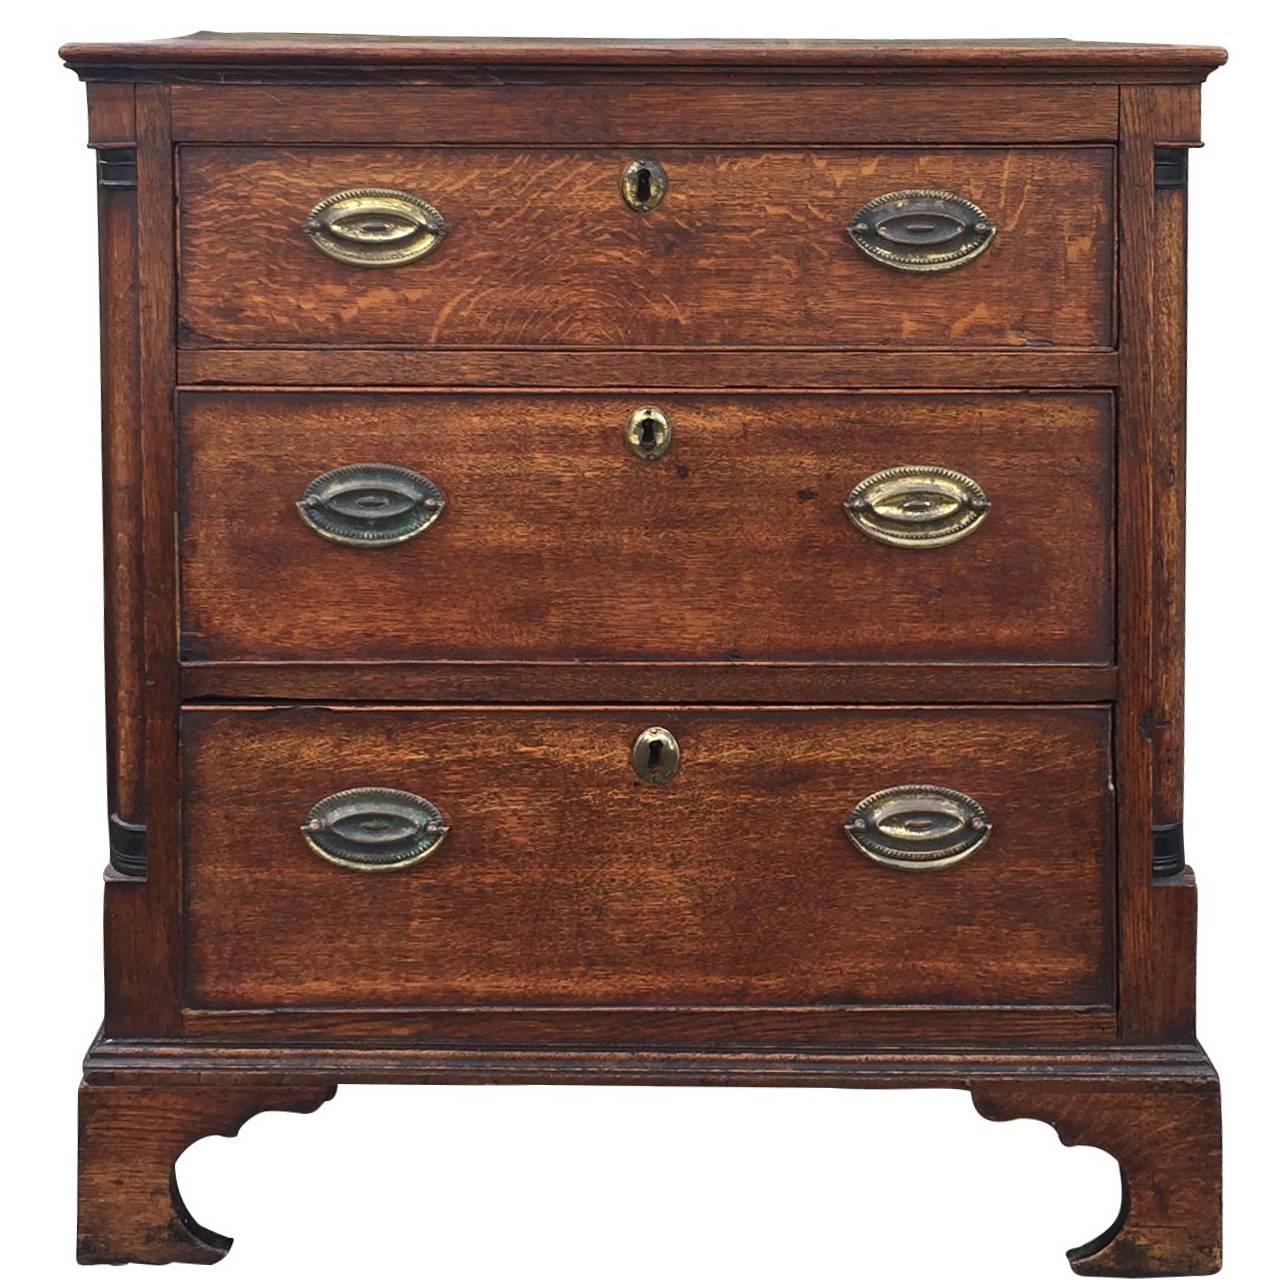 19th Century English Regency Oak Chest with Carted Corners